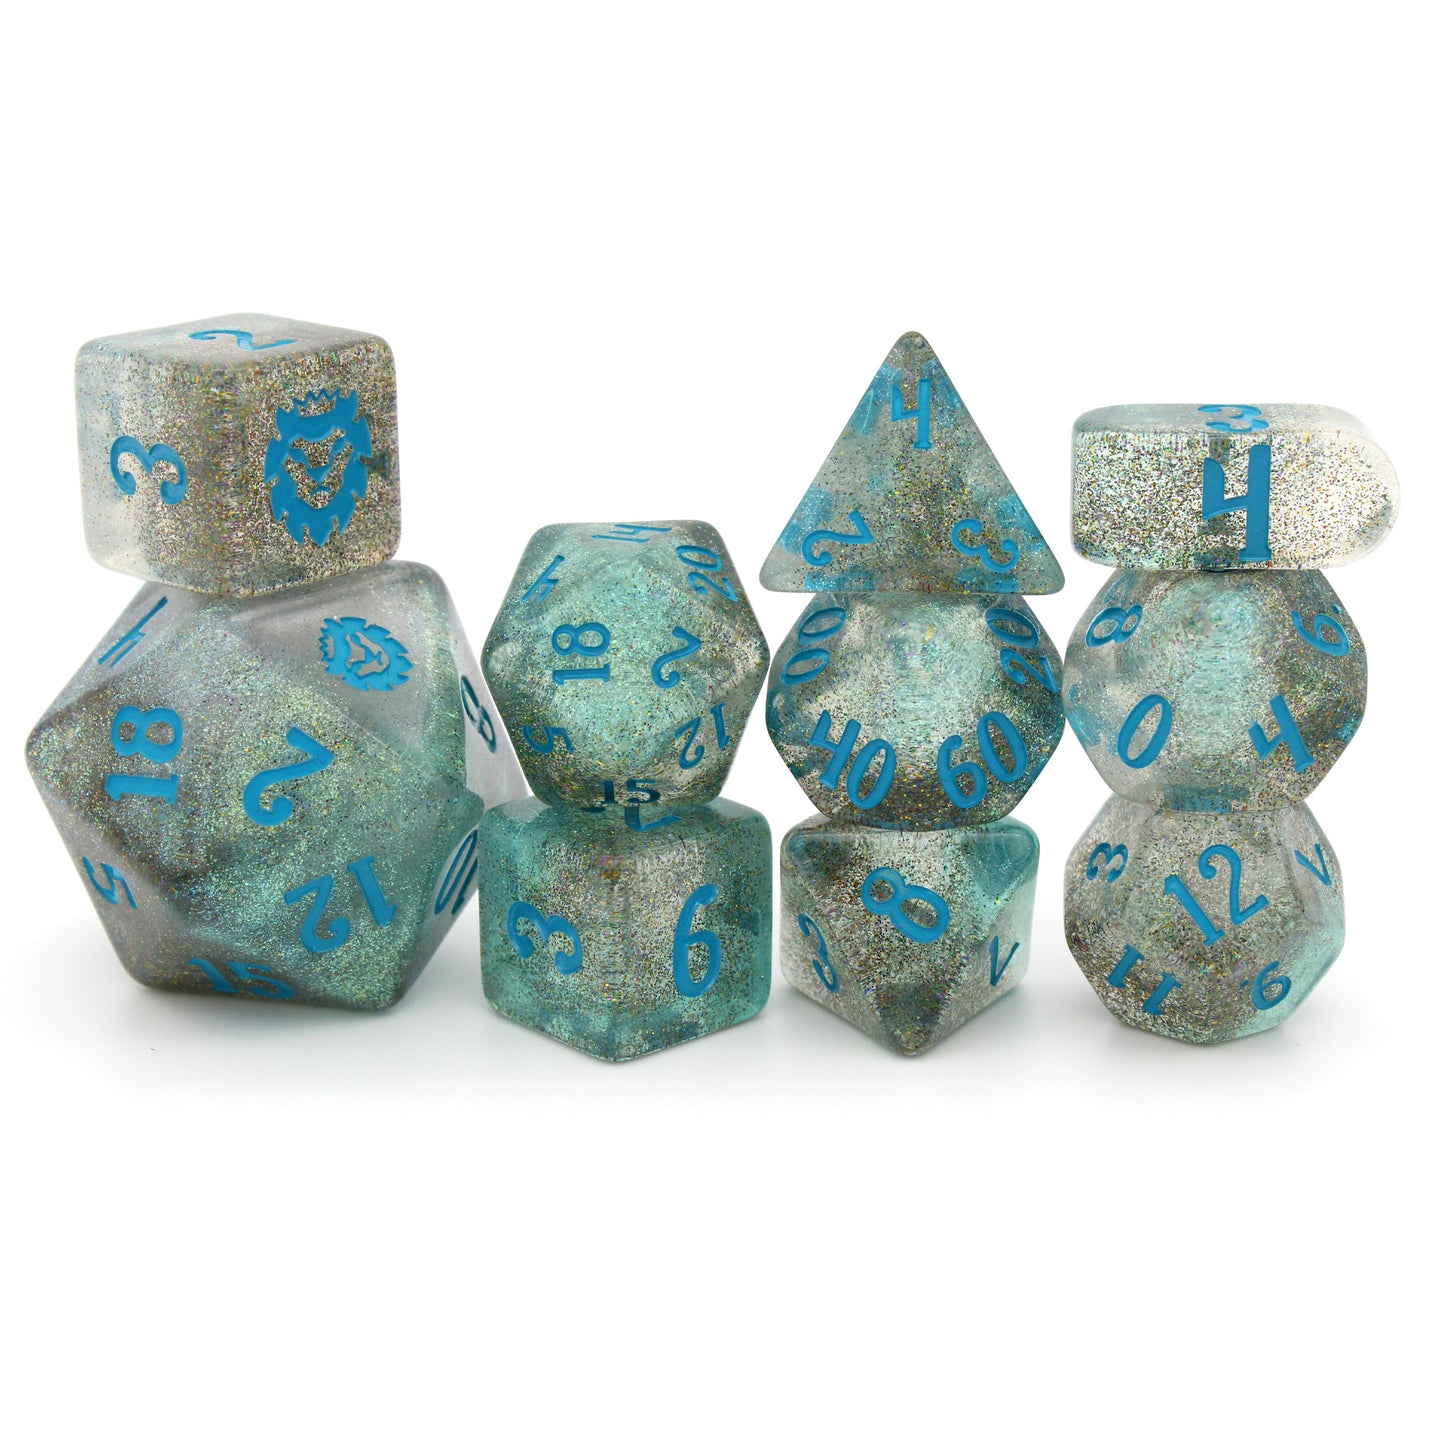 River Magic, a 10-piece dice set of swirling blue, brown, and clear resin, shot through with silver glitter and inked in teal.